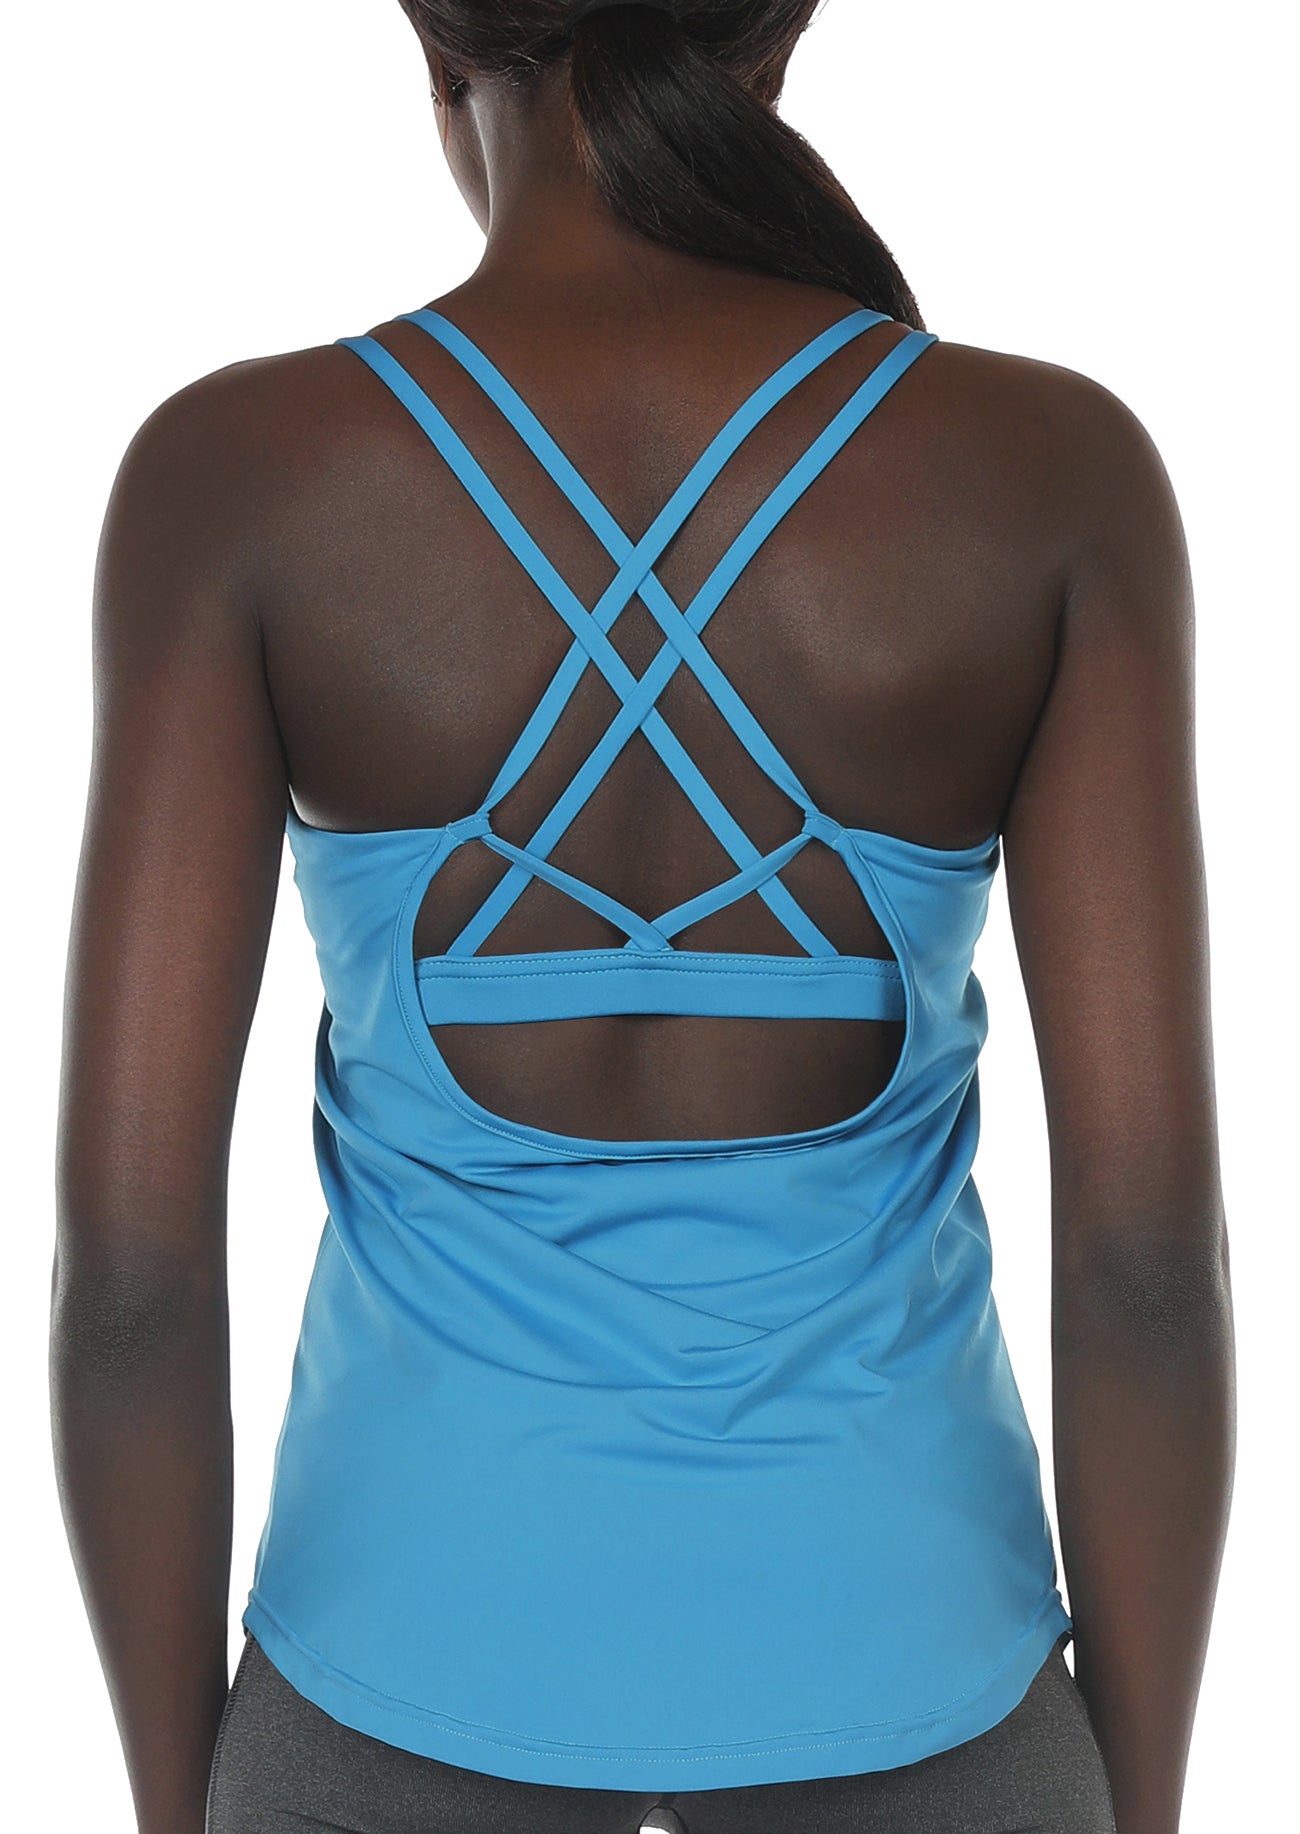 Workout Tank Tops for Women with Built in Bra Athletic Camisole Strappy  Back Yoga Tanks 